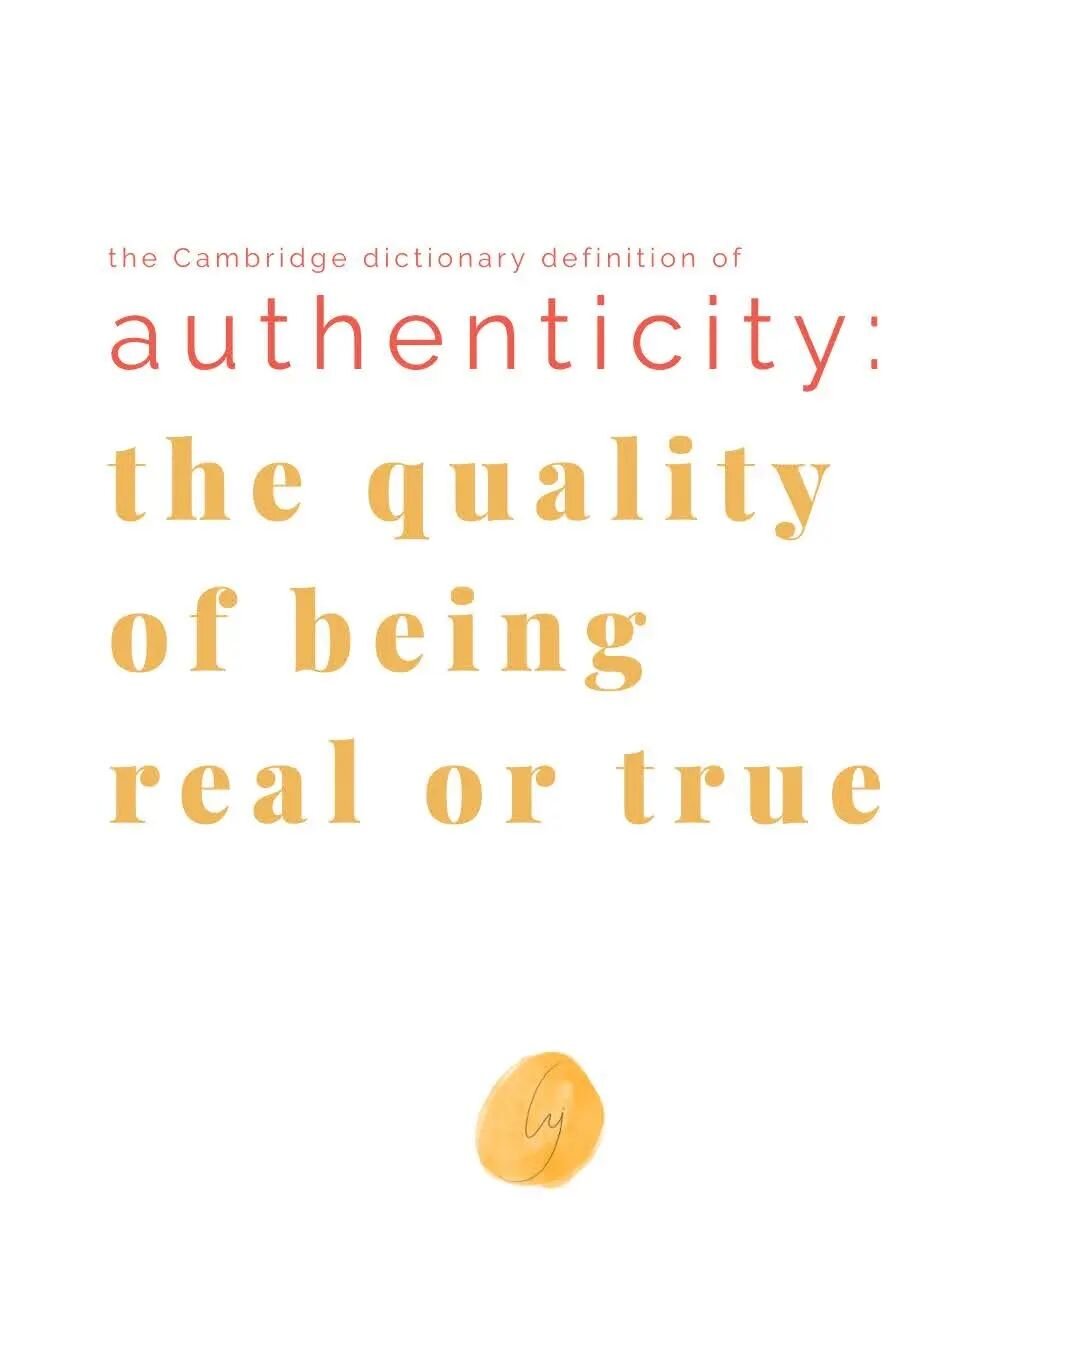 For me, being authentic feels like this:

I feel strong.
I feel connected to the ground below me.
My shoulders draw back, a lightness surrounds me.

I am open, I am soft.
There is fluidity.

In conversation, I am aware.

I am aware of tension.
The te